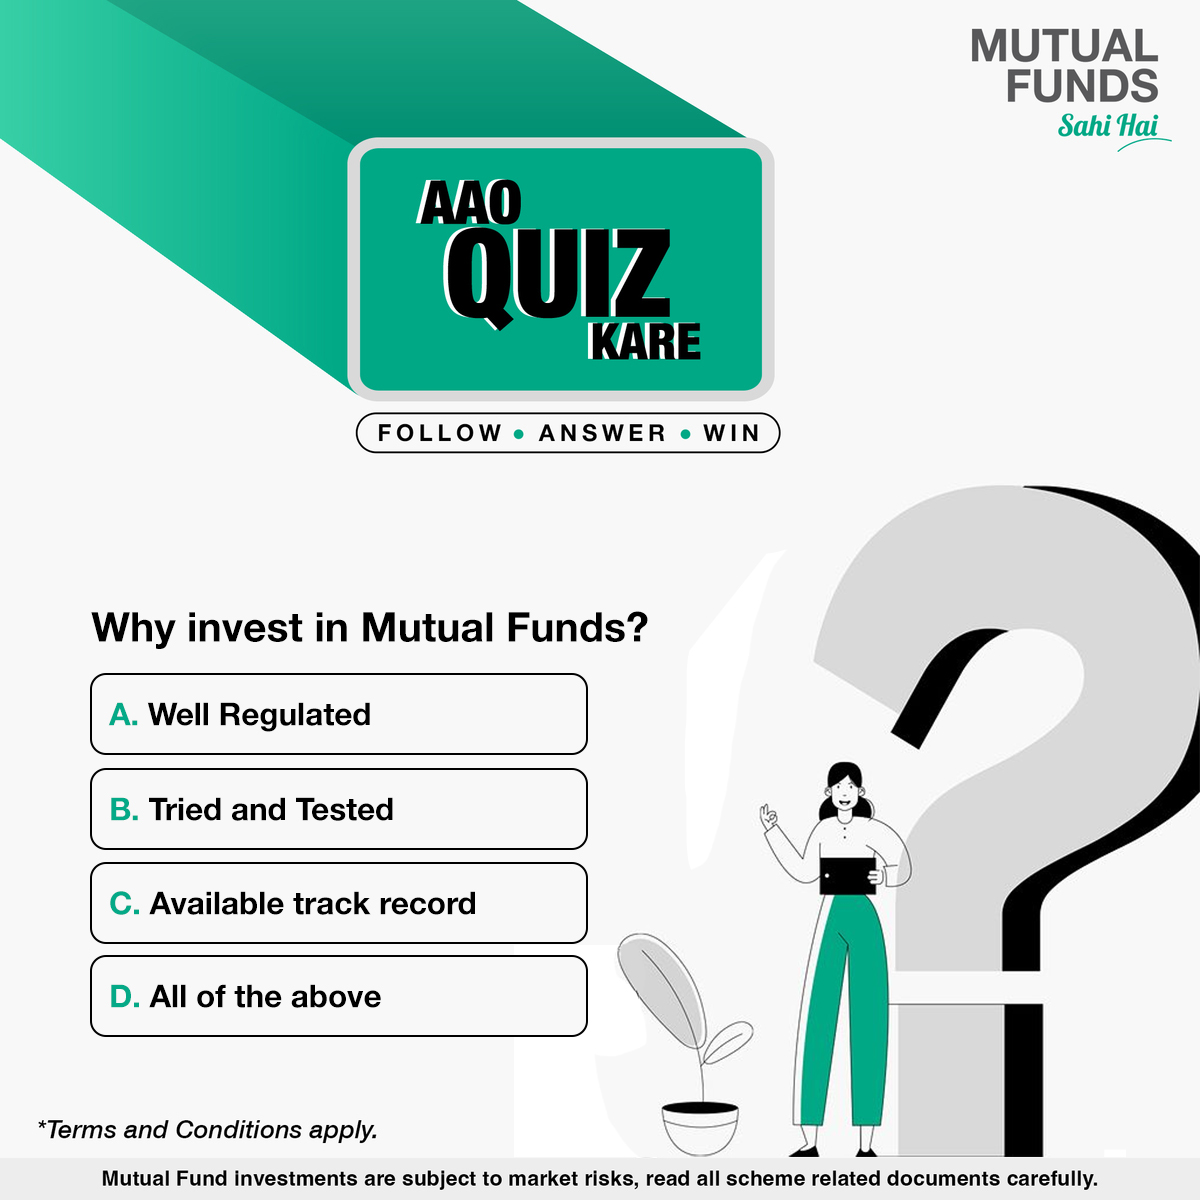 Its your time to shine! Follow us, answer the question correctly, and share a screenshot of following us. To know more: mutualfundssahihai.com/en/why-invest-… ​ T&C Apply: ​​bit.ly/495q04q #Quiz #MutualFundsSahiHai #AaoQuizKare #Investment #SIP #MutualFunds #ContestAlert